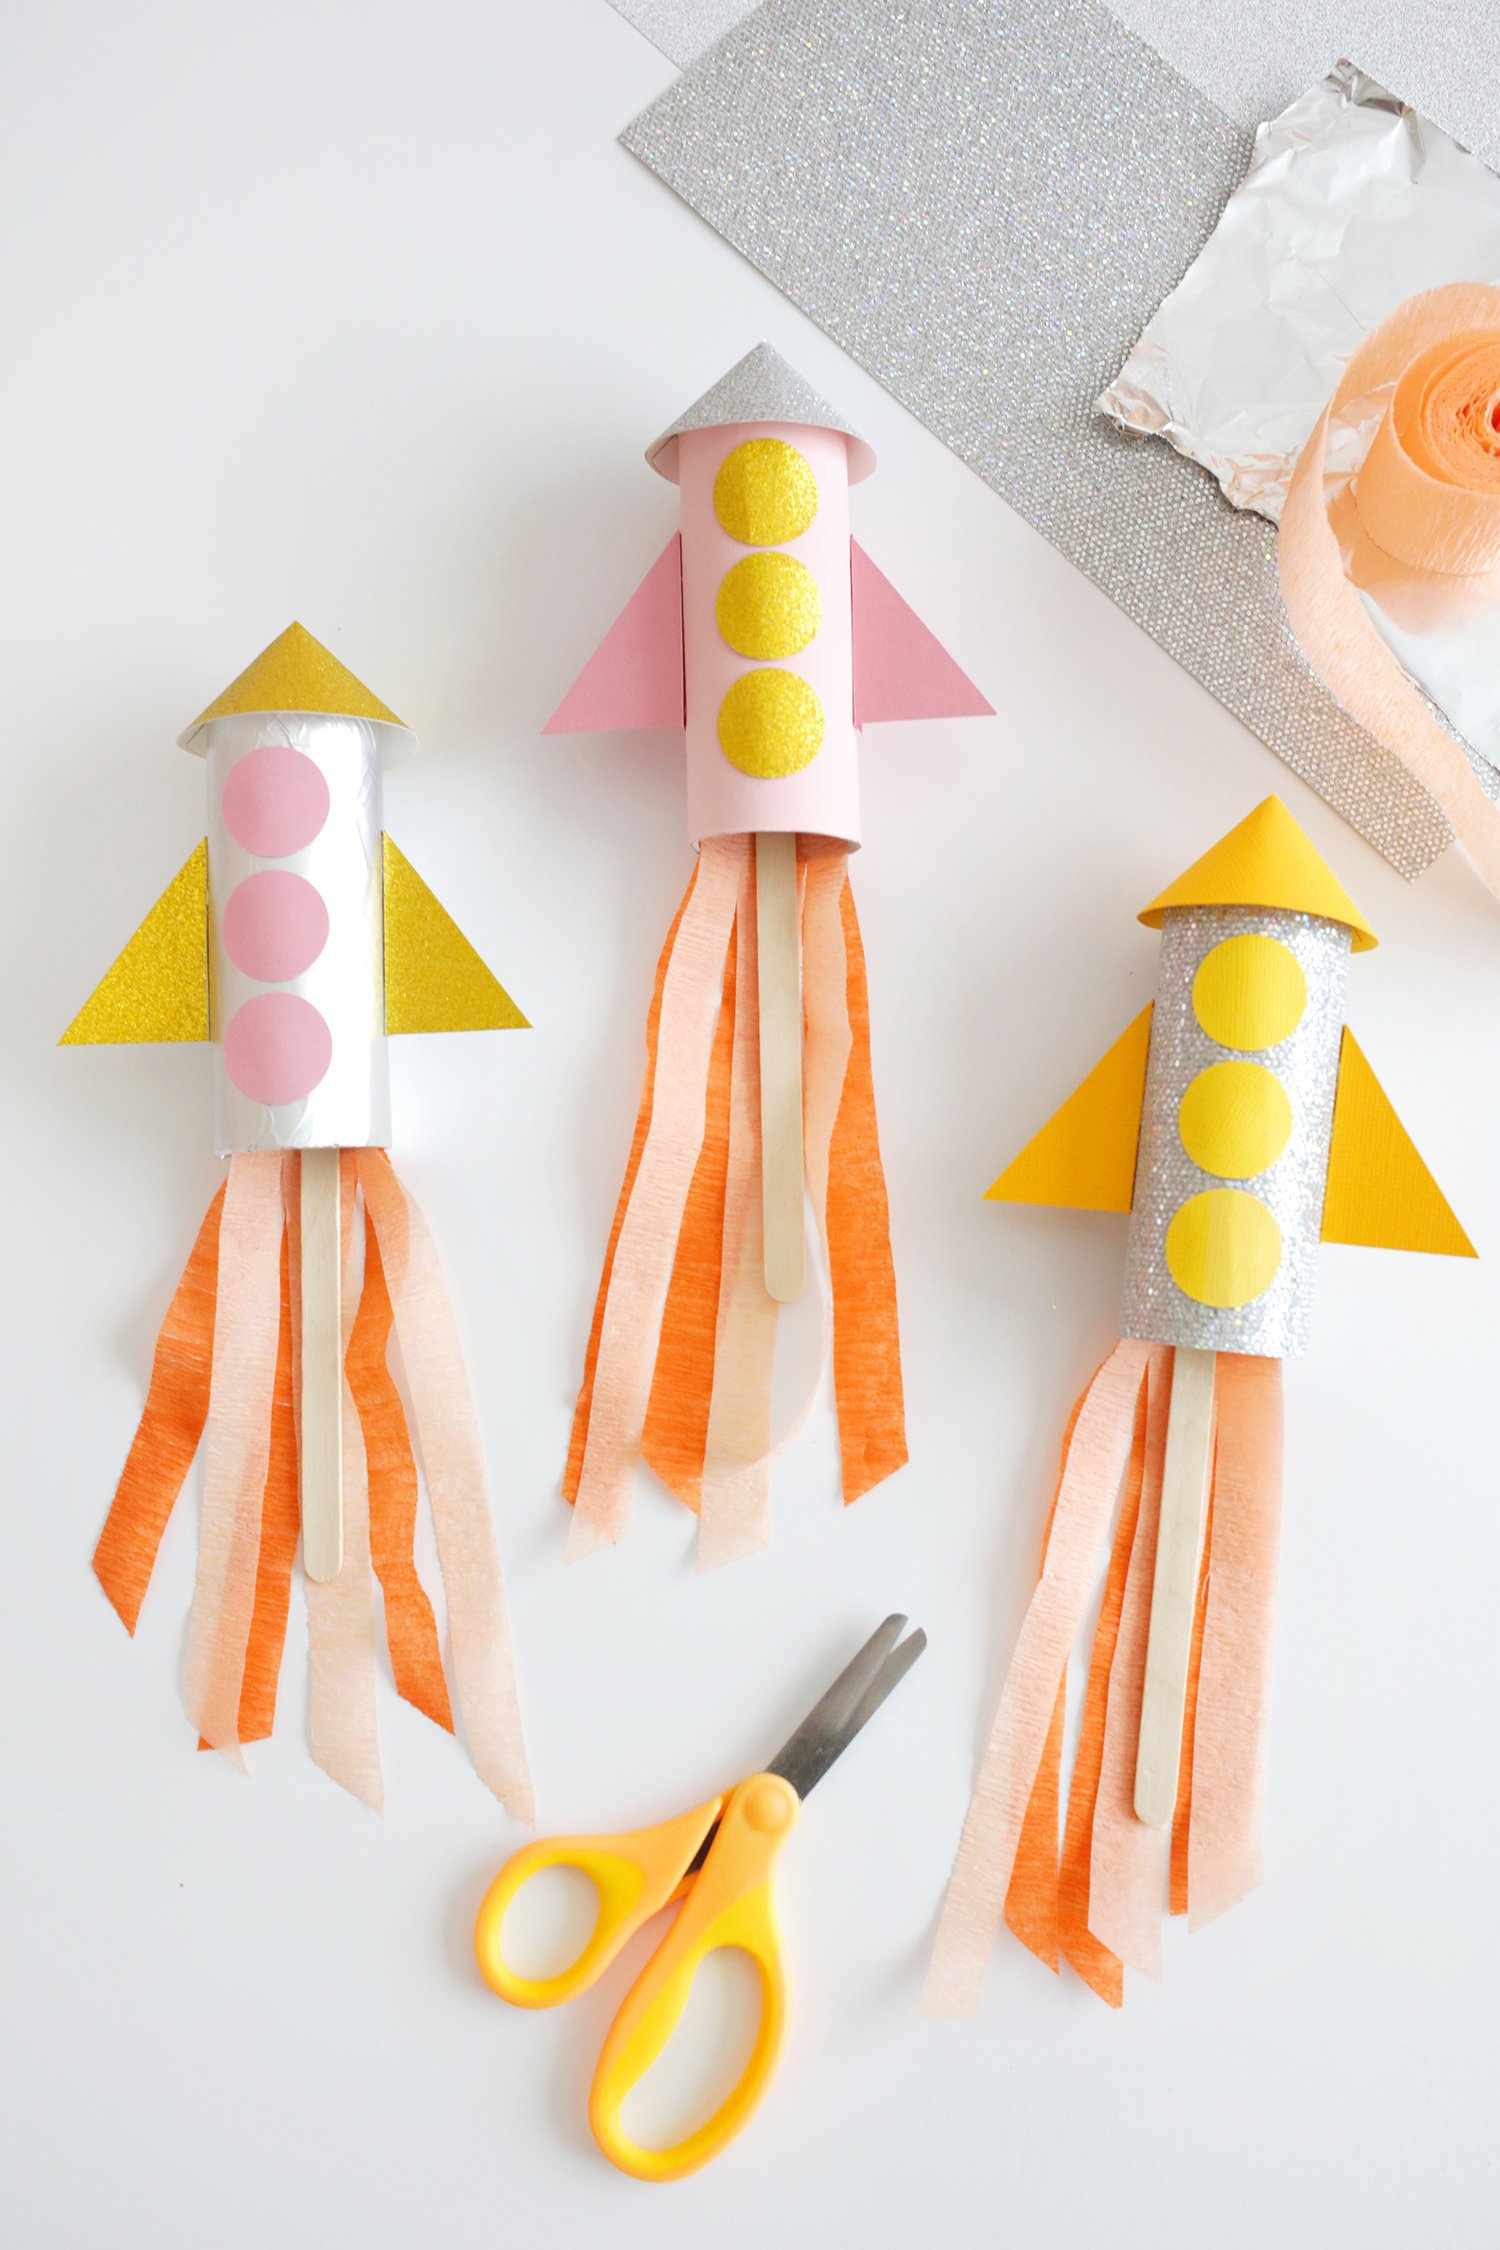 paper rocket ships with crepe paper flames